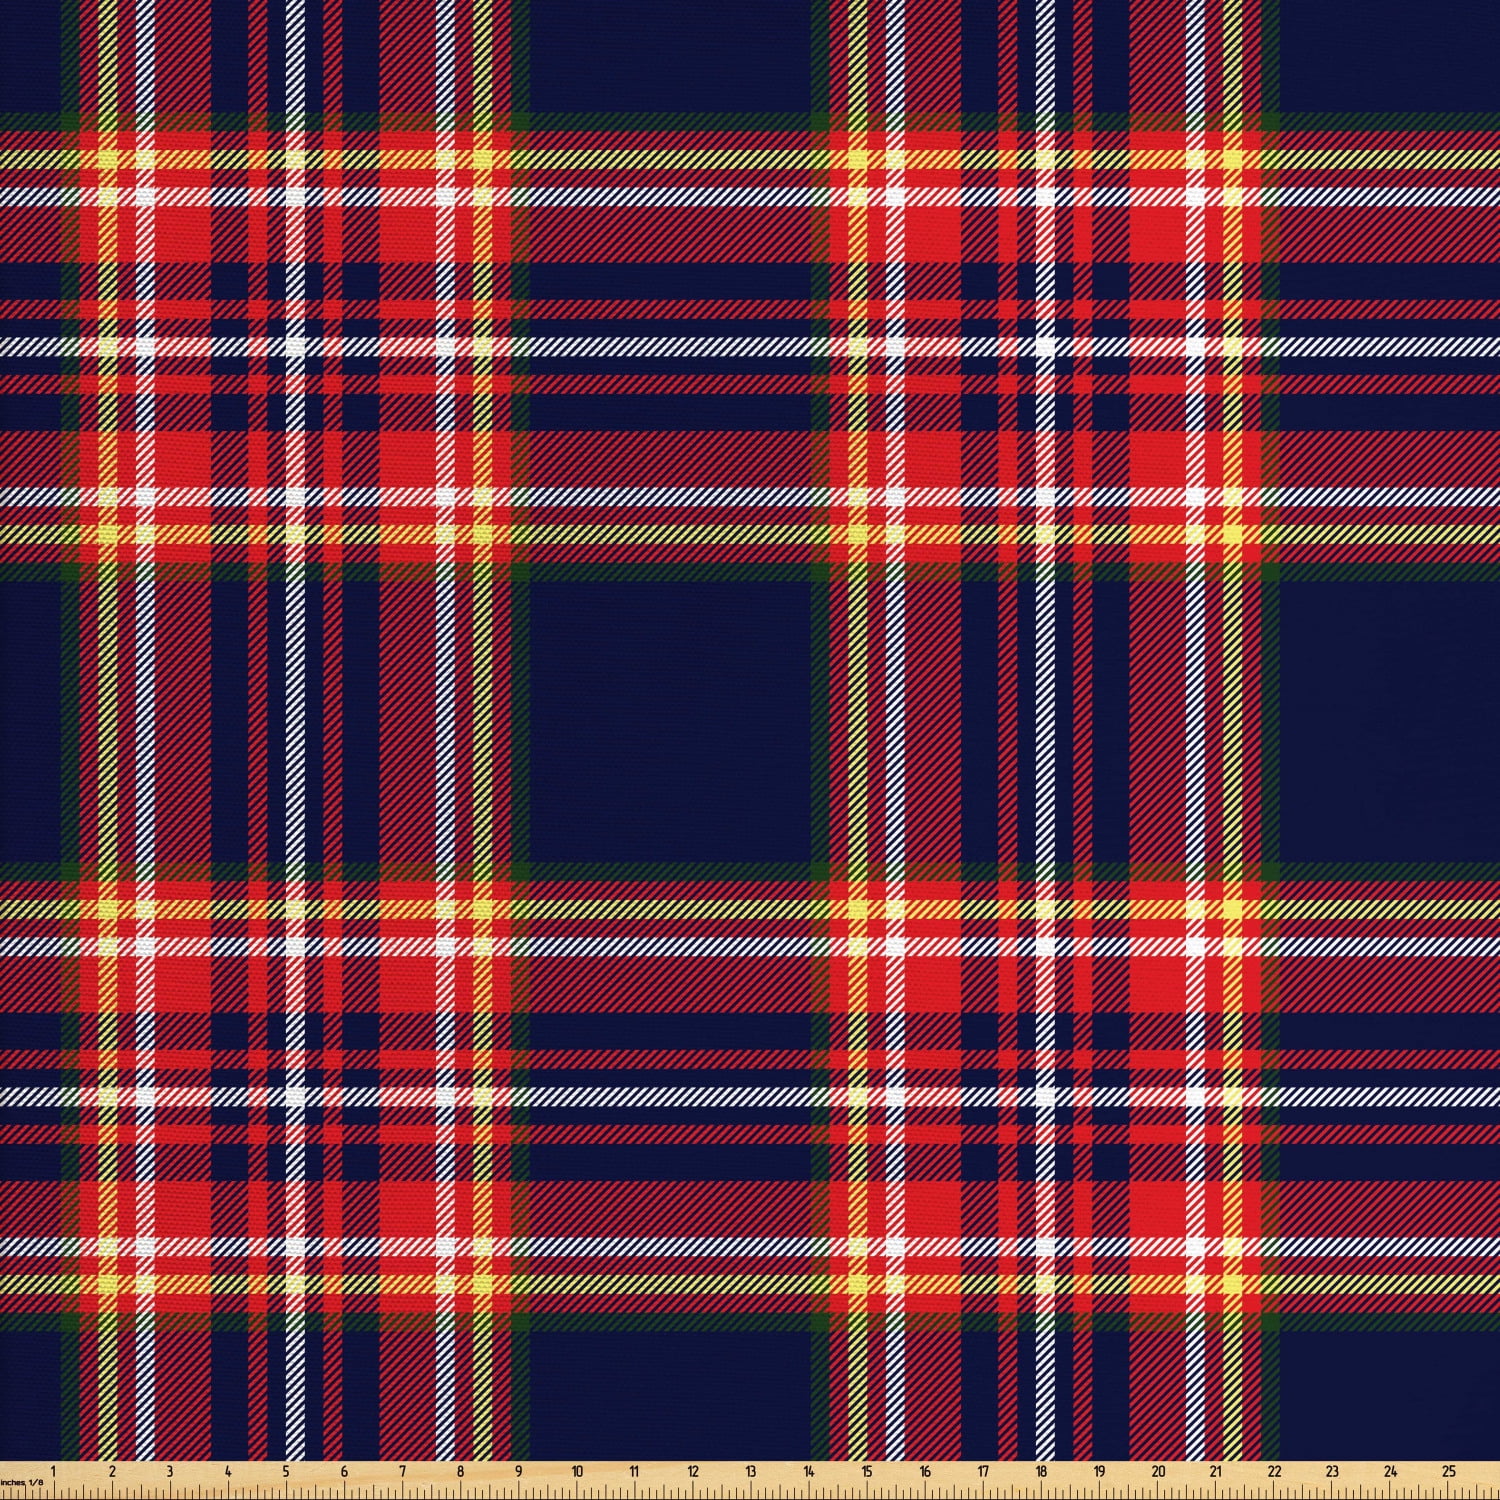 plaid-fabric-by-the-yard-traditional-pattern-from-scotland-vivid-and